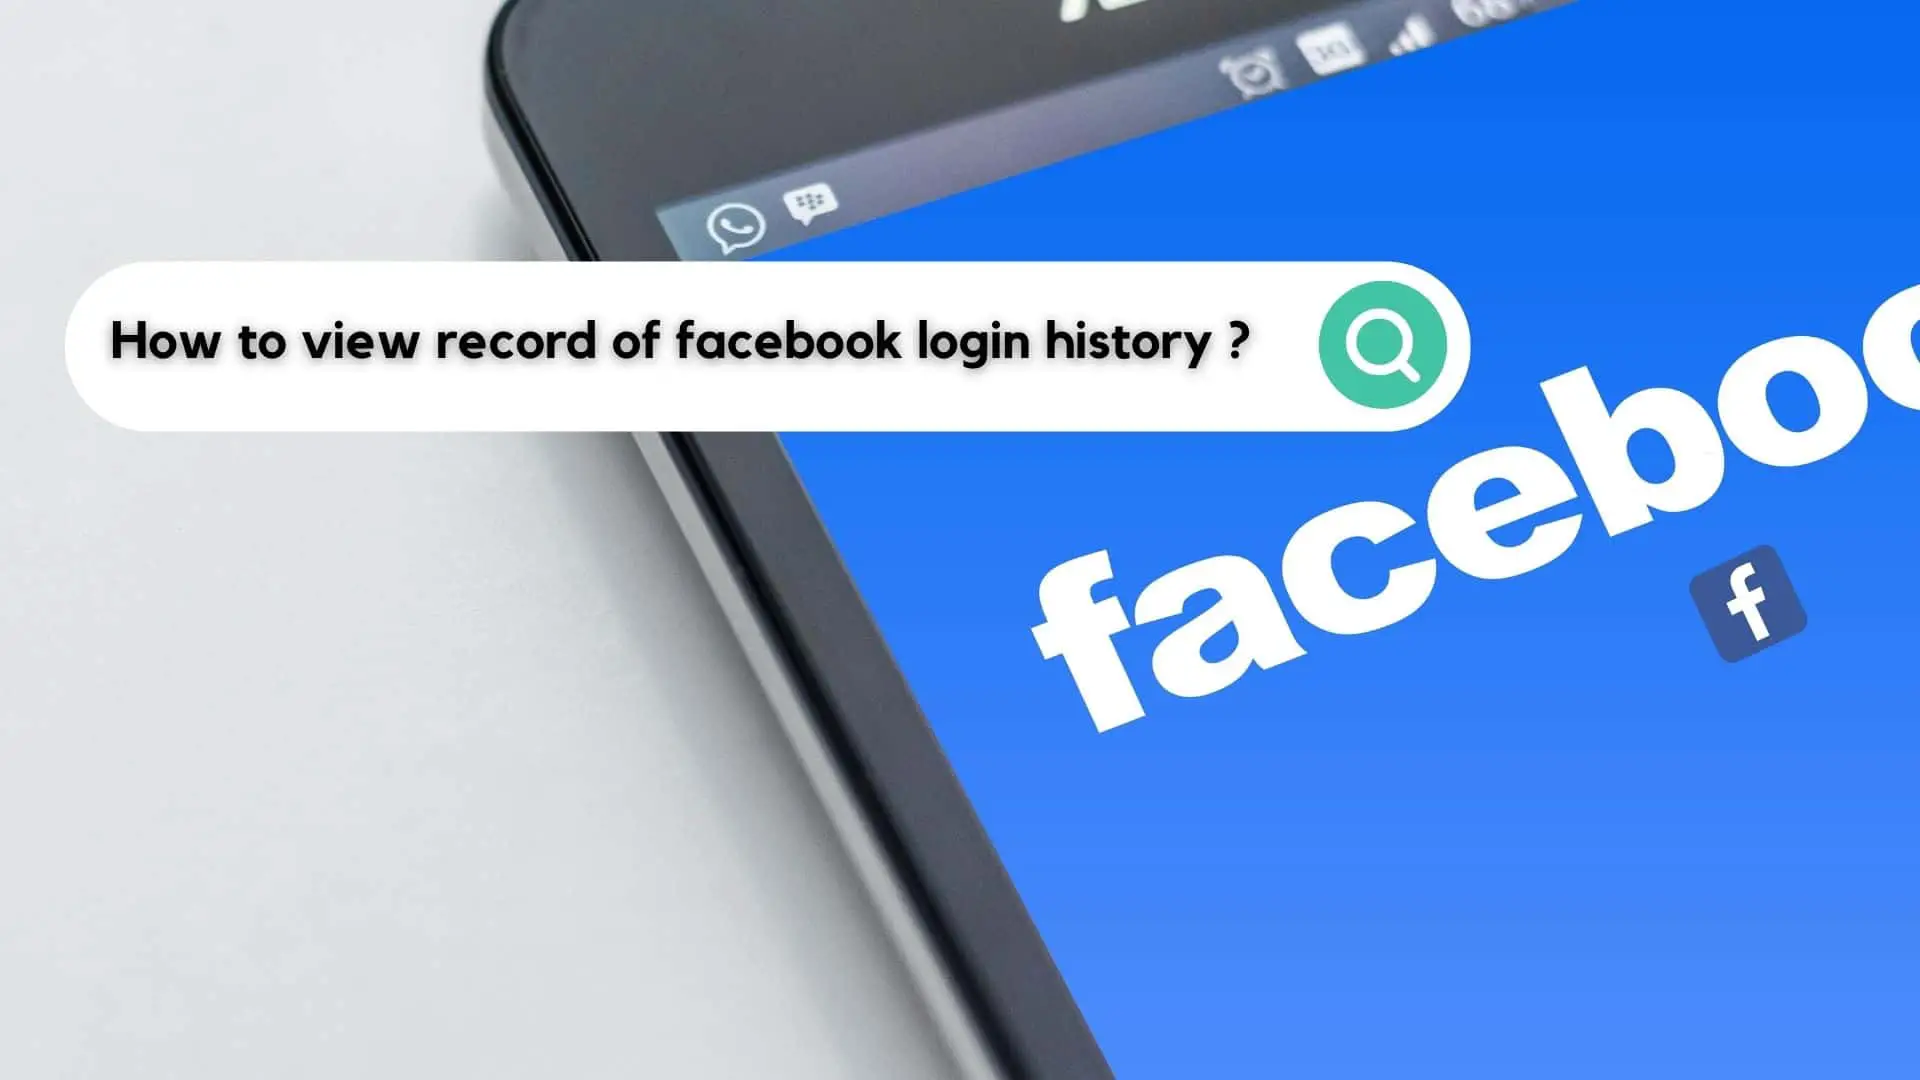 Login in with facebook